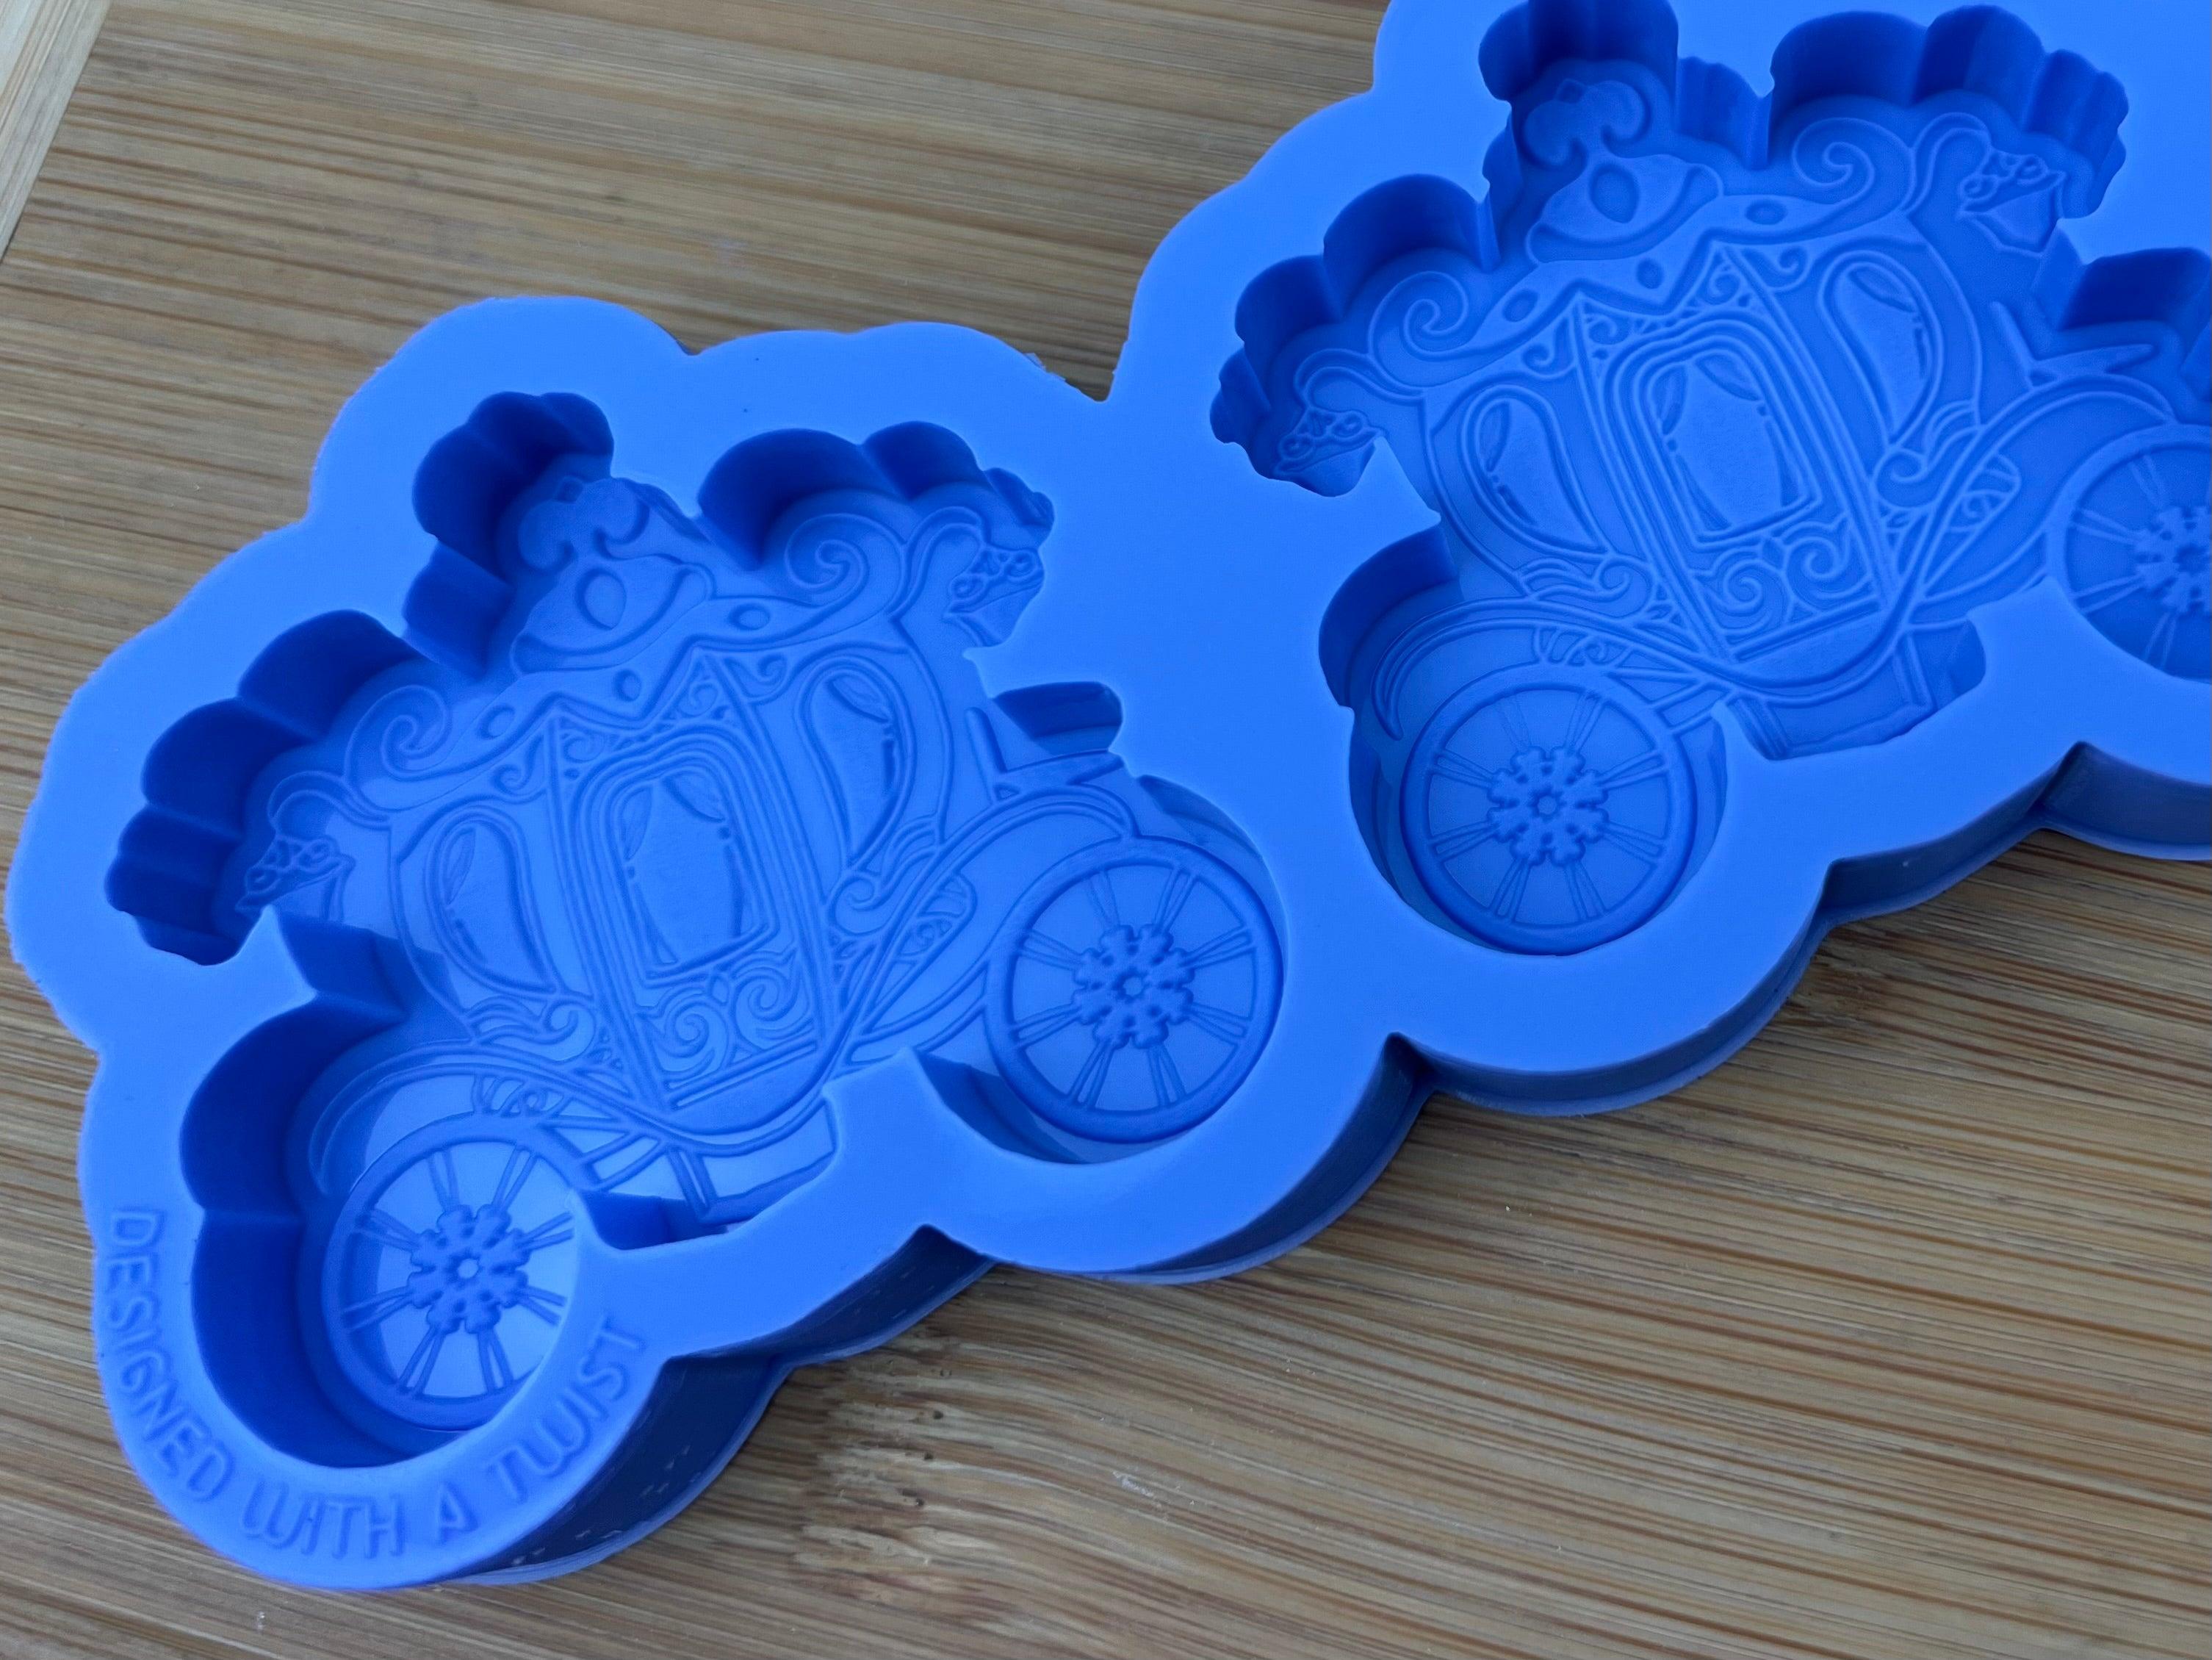 Fairytale Carriage Wax Melt Silicone Mold - Designed with a Twist - Top quality silicone molds made in the UK.